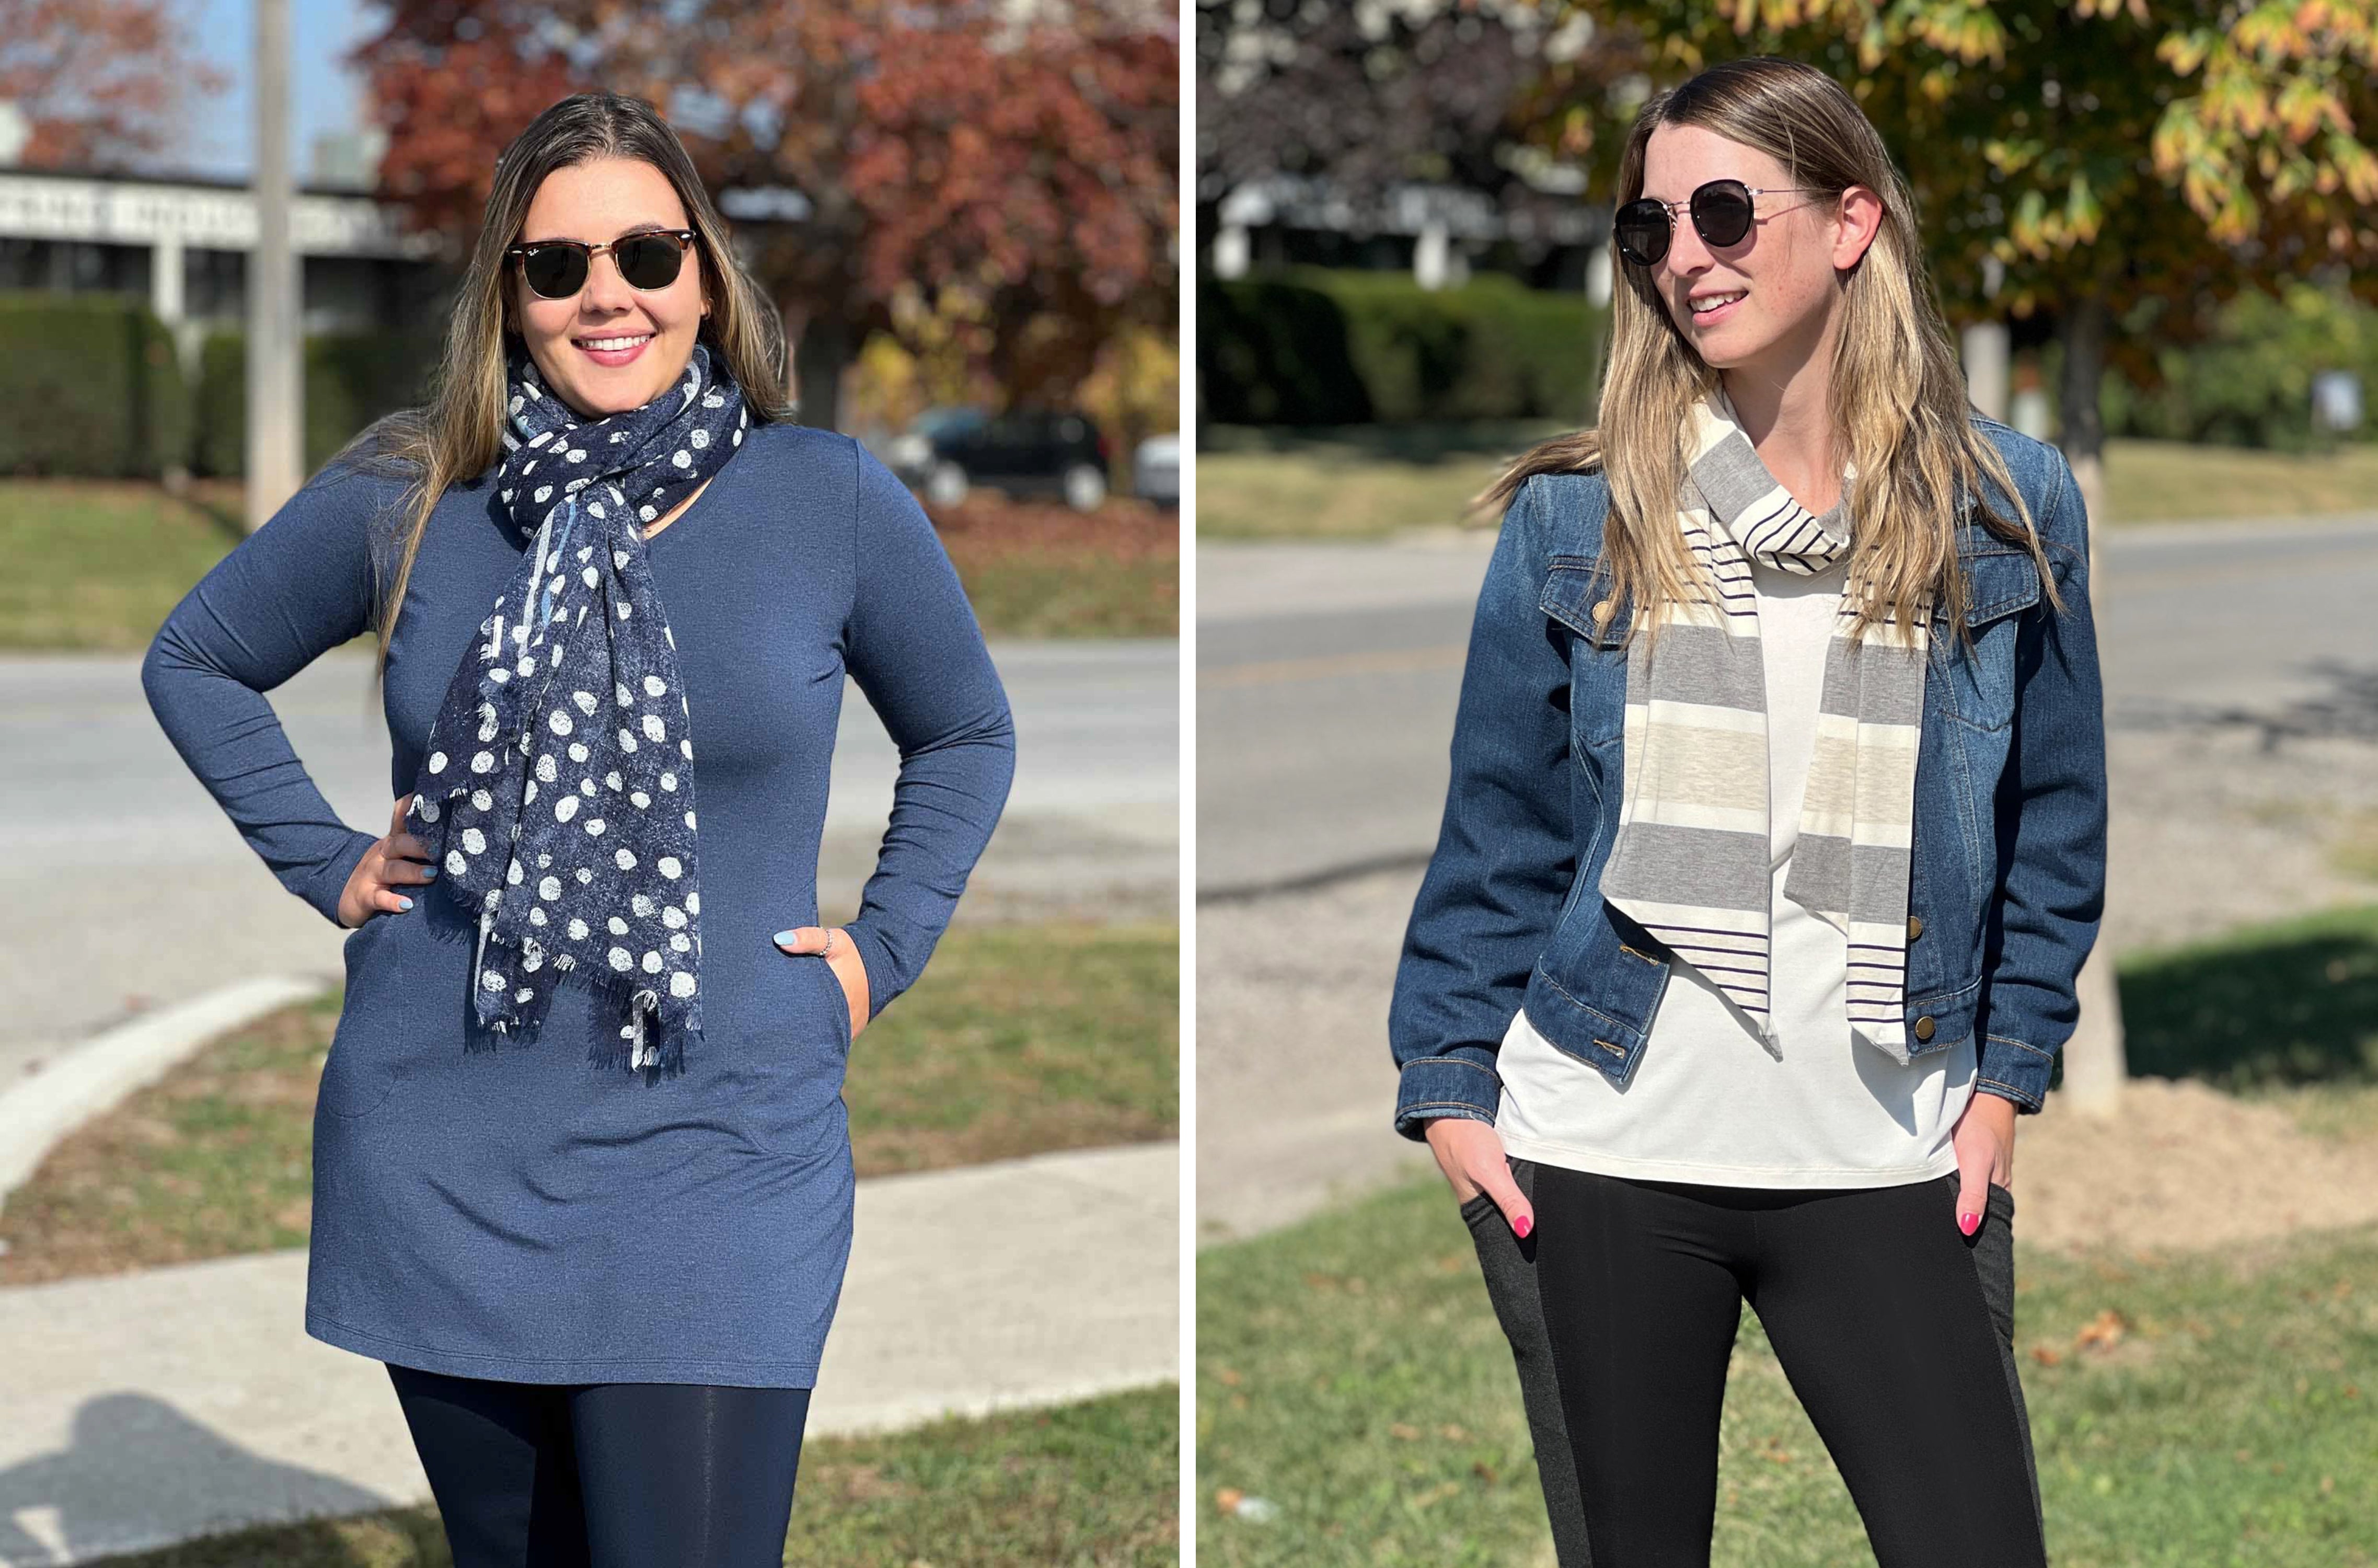 Two outfit inspirations for winter to spring transitional outfits